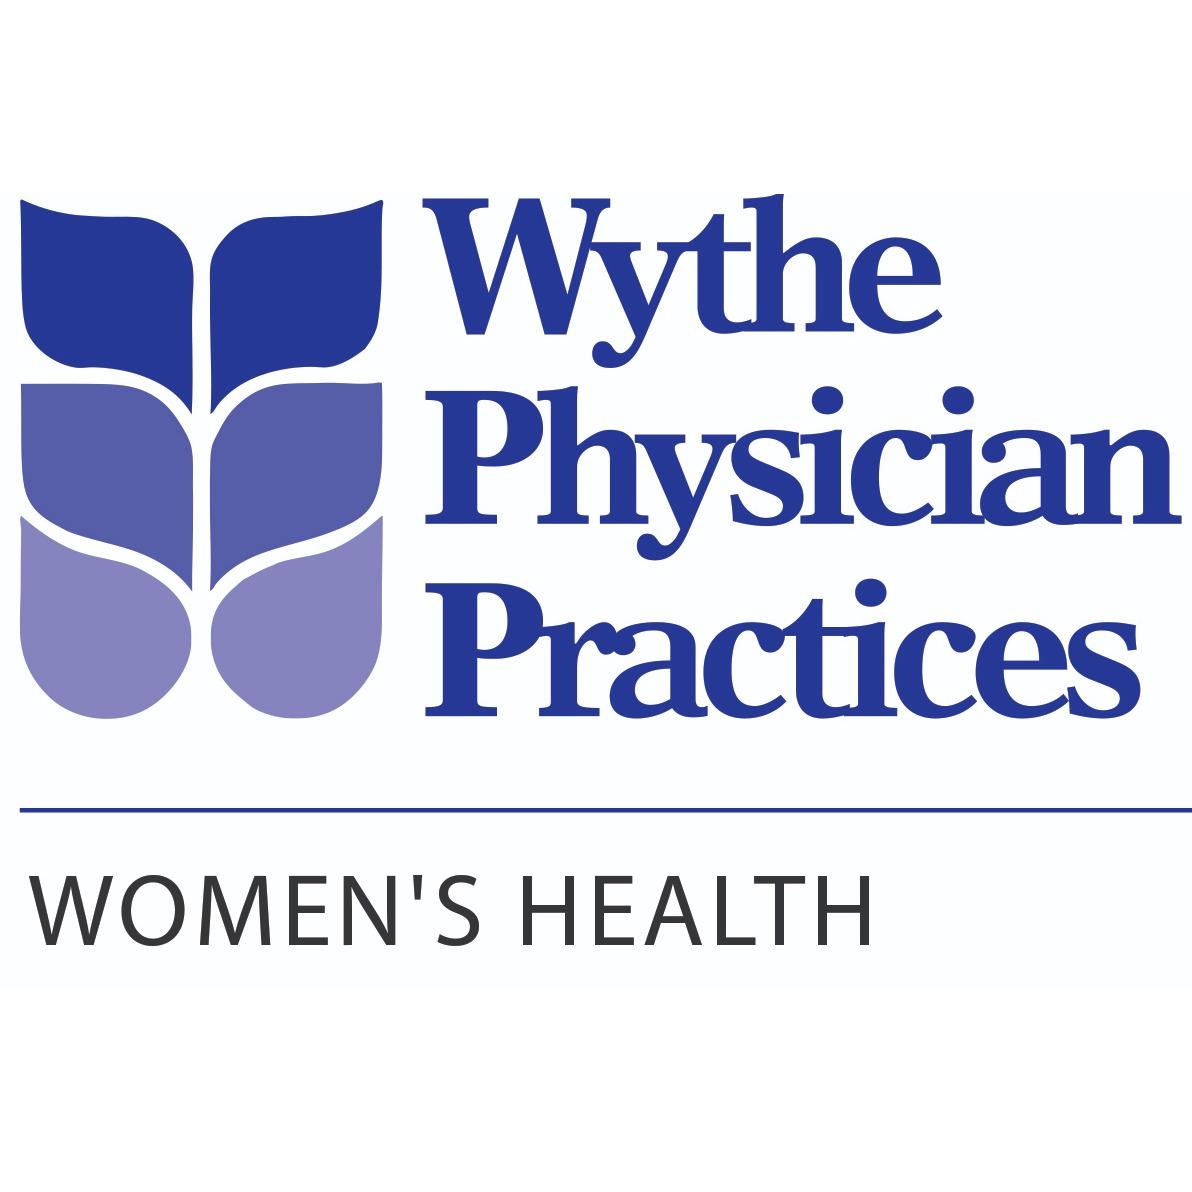 Wythe Physician Practices - Women's Health Logo